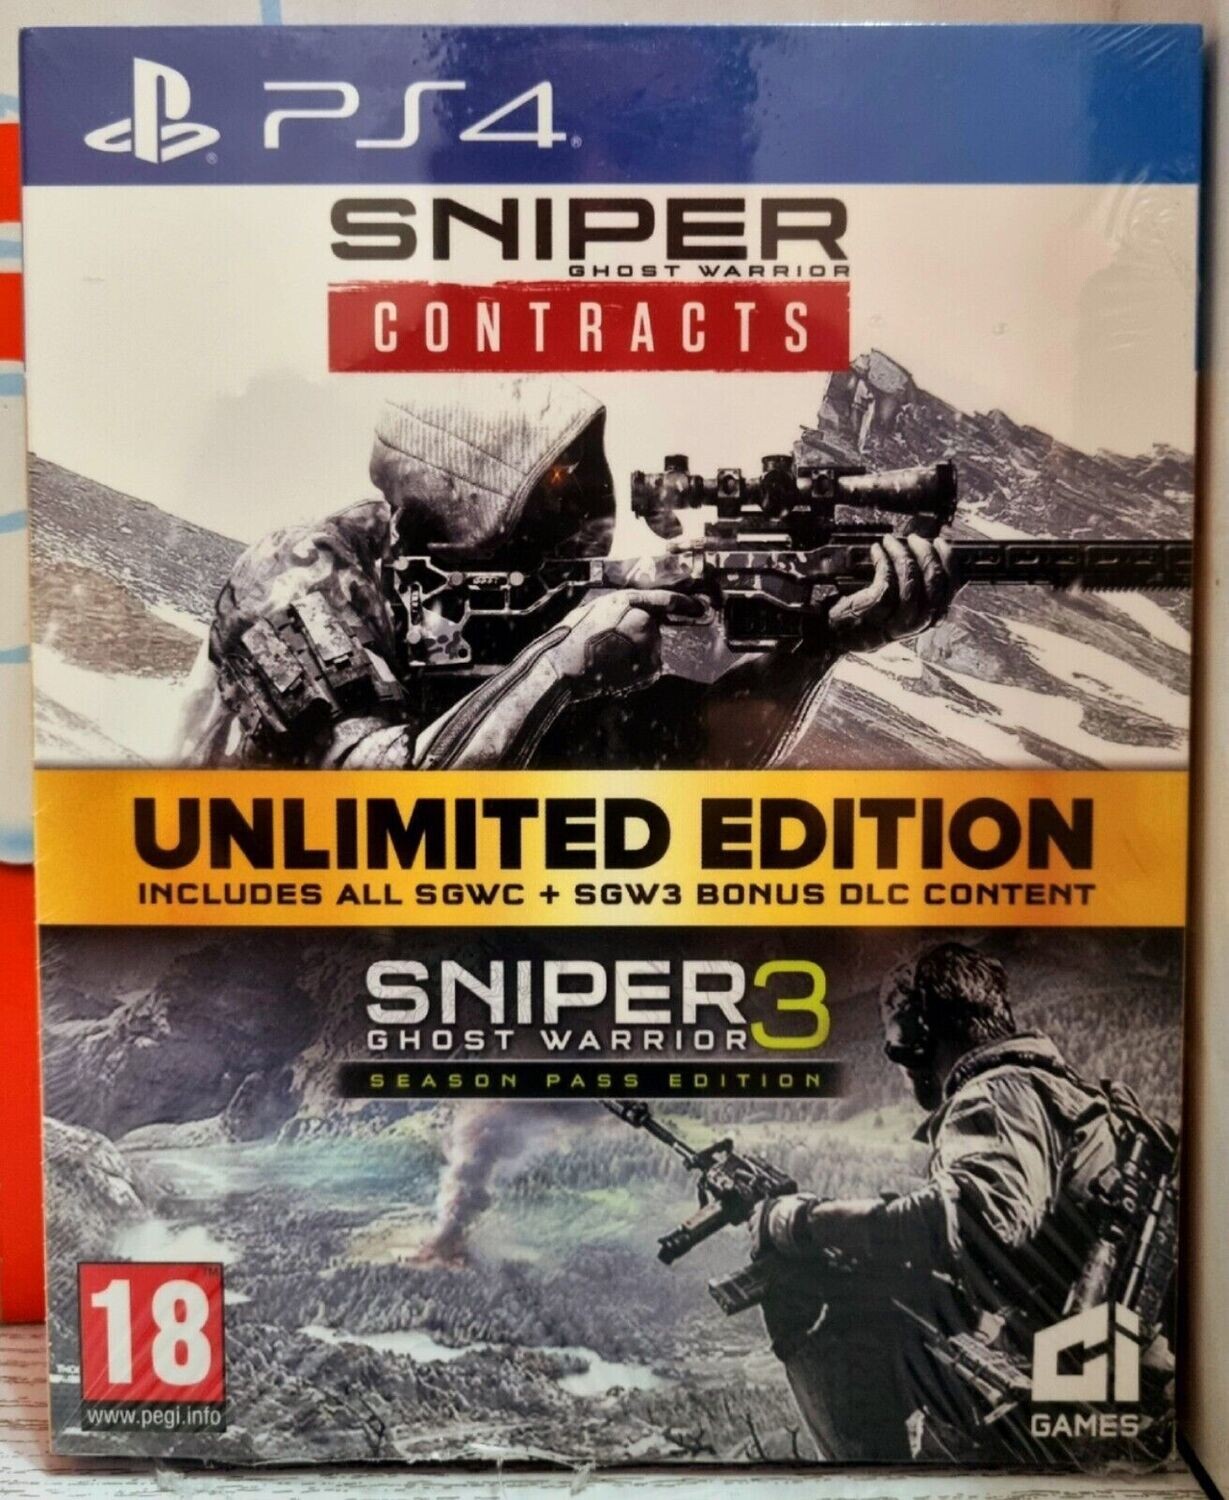 SNIPER GHOST WARRIOR UNLIMITED EDITION PS4 CONTRACTS+SGW3+DLC